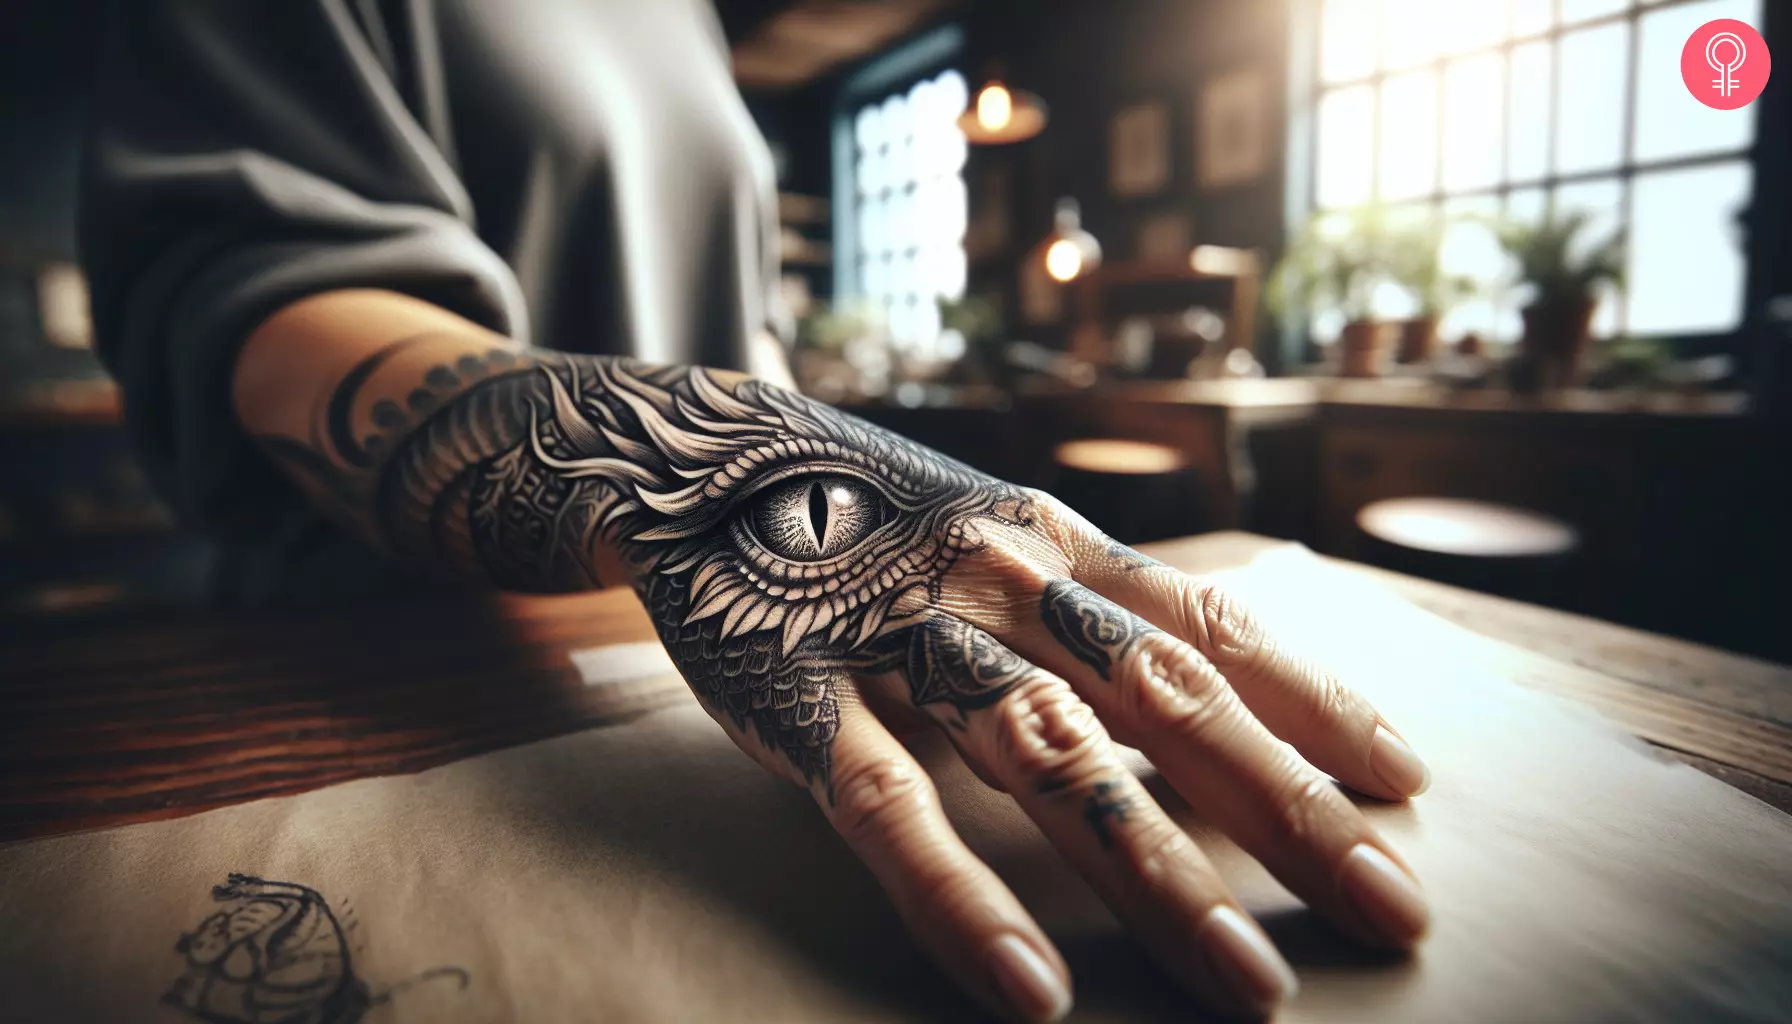 A realistic black and white dragon eye tattoo on the hand